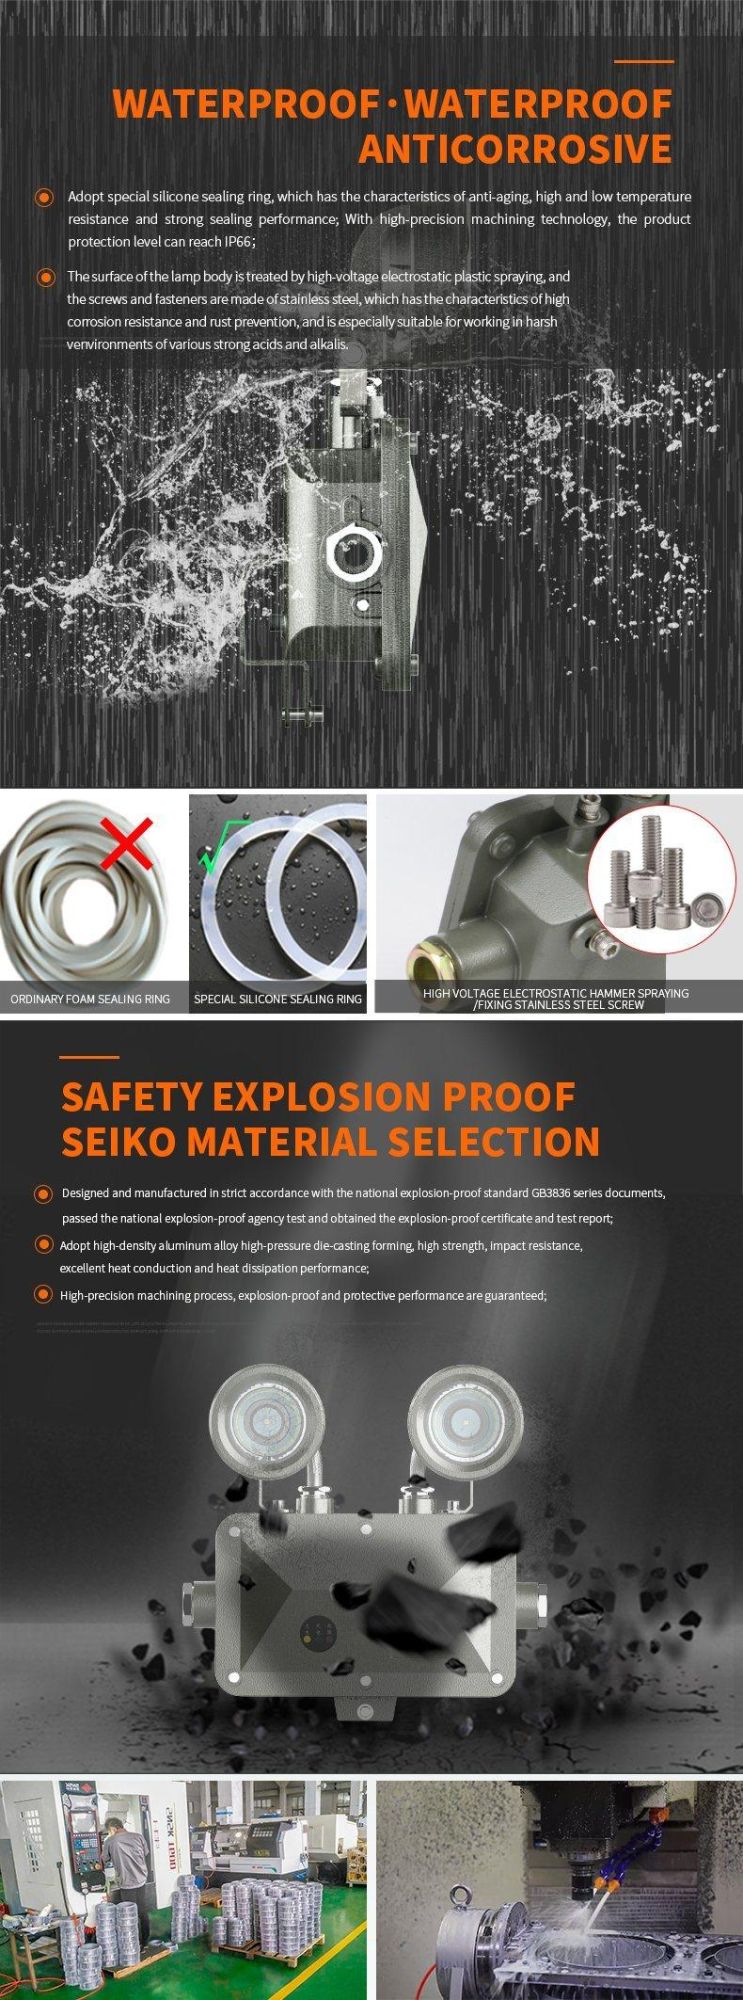 Atex CE RoHS Factory Supply LED Explosion Proof Emergency Lighting Exproof Lamp Atex Emergency Light